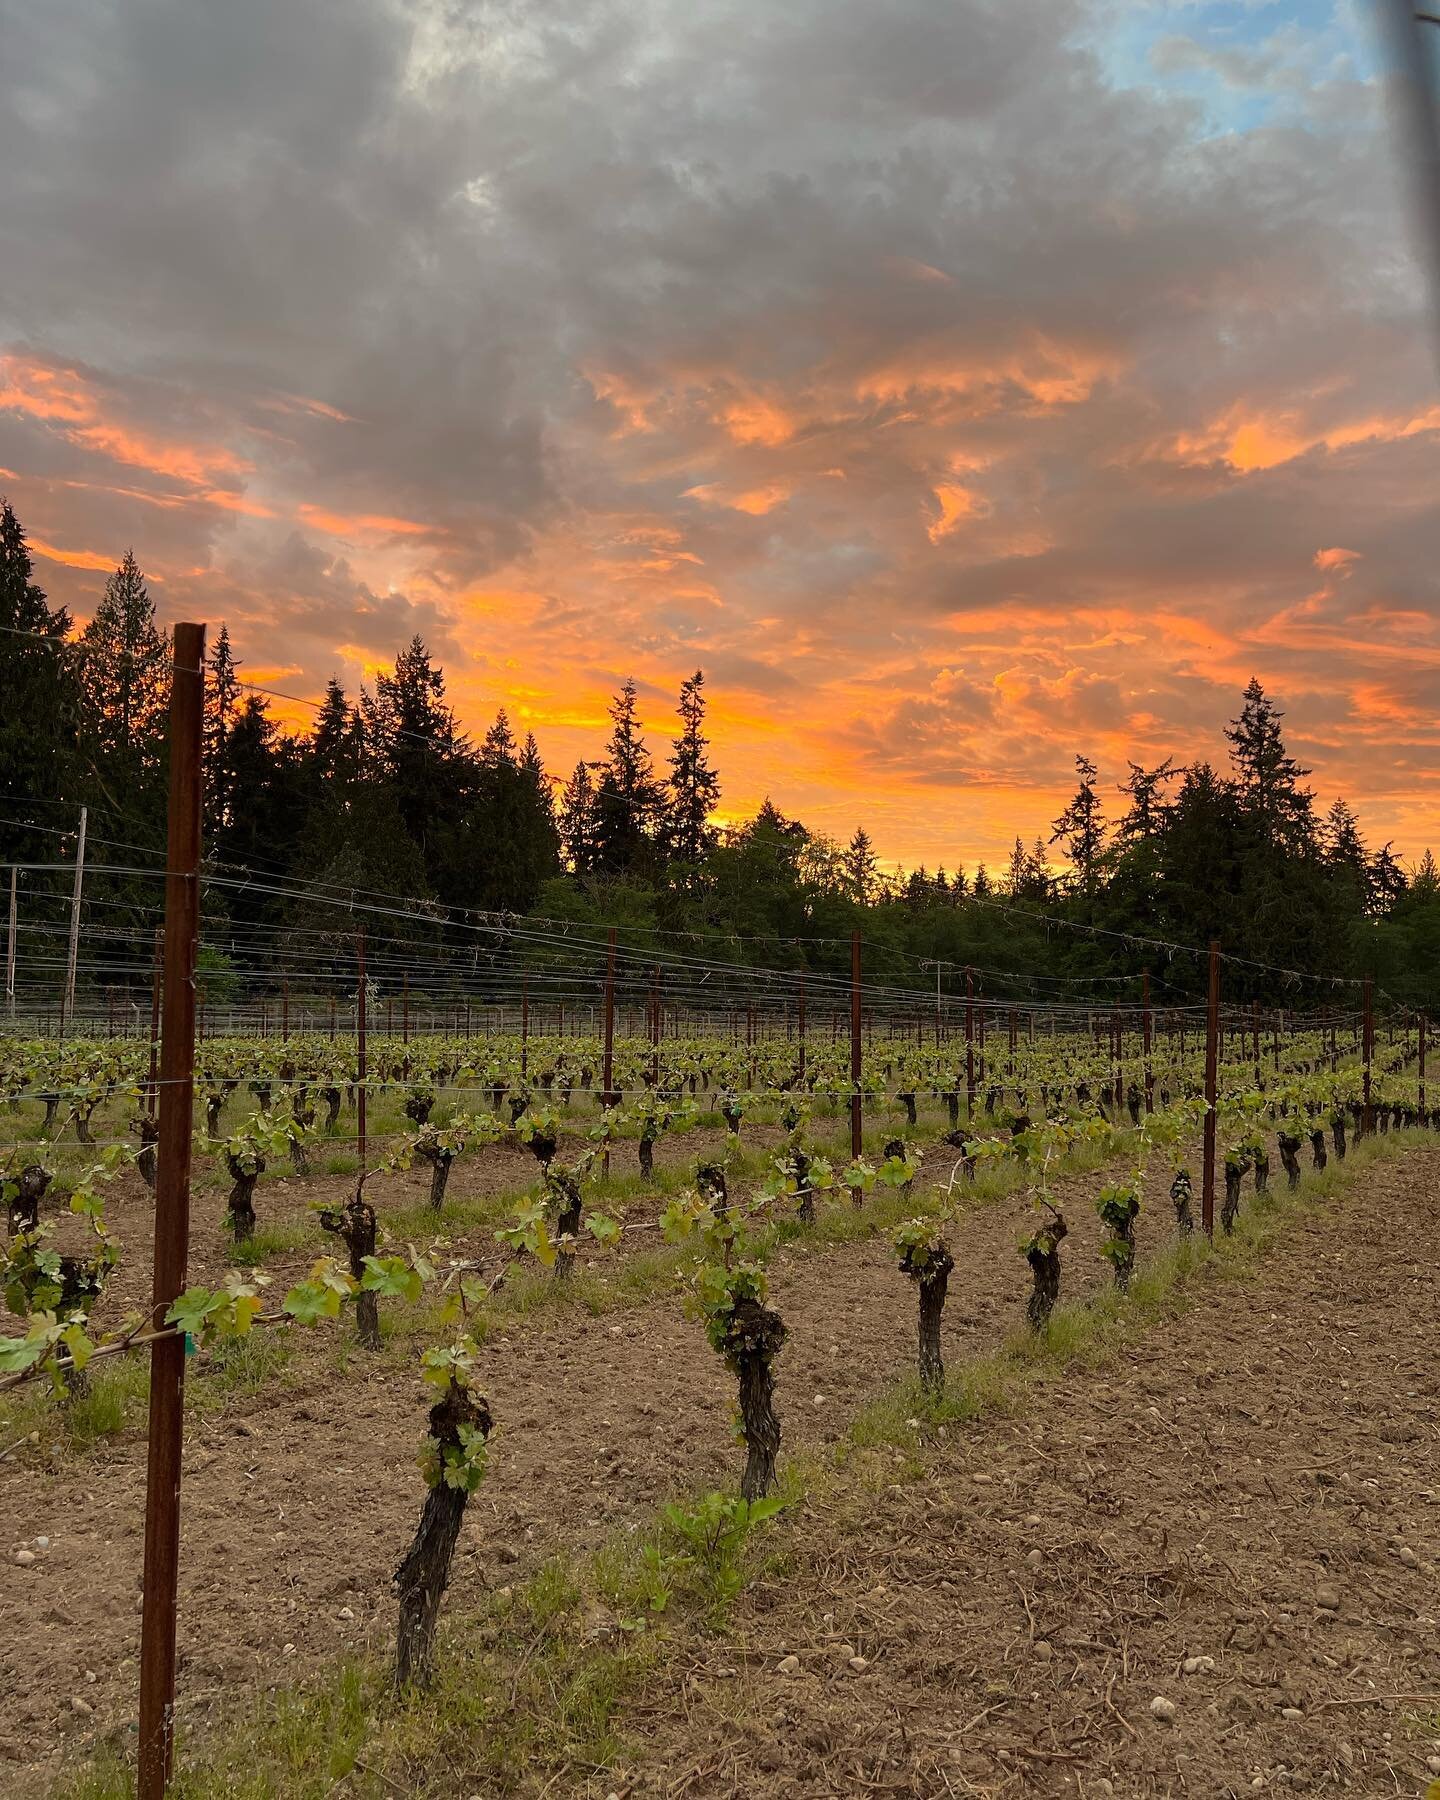 Long hot days in the vineyard turn into beautiful evenings.